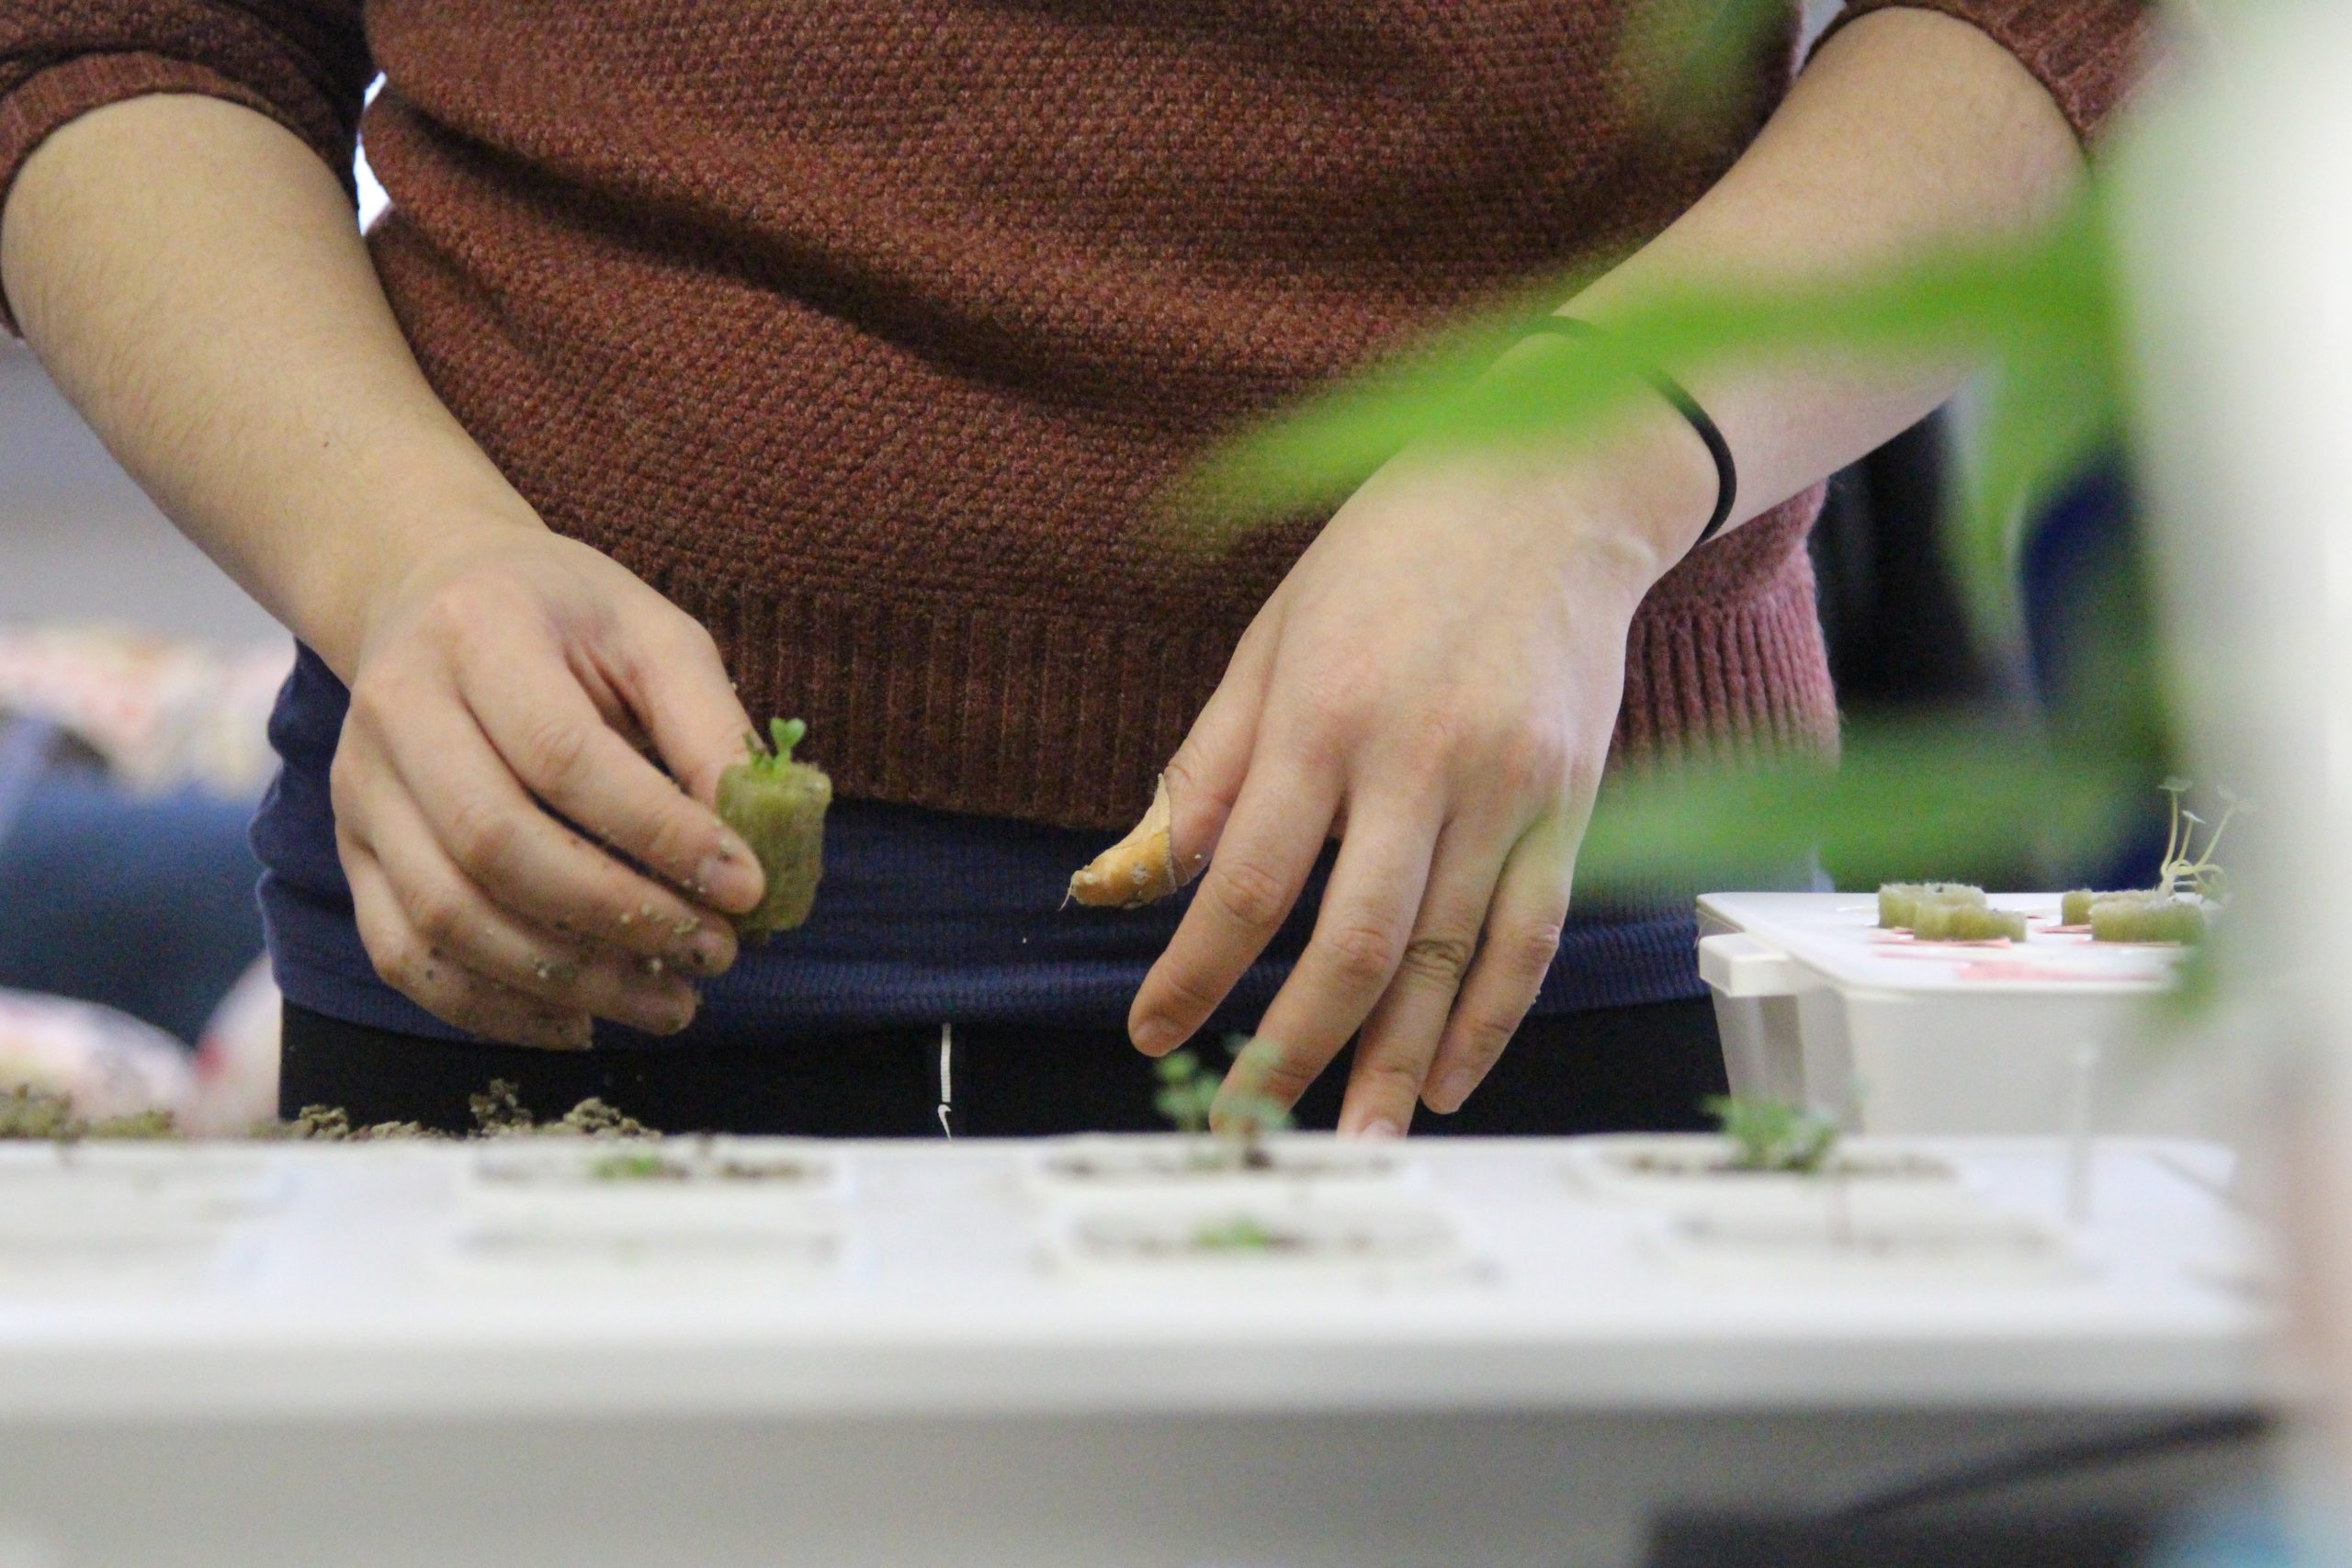 No Soil Needed: How to Grow Plants with Small-Scale Hydroponics